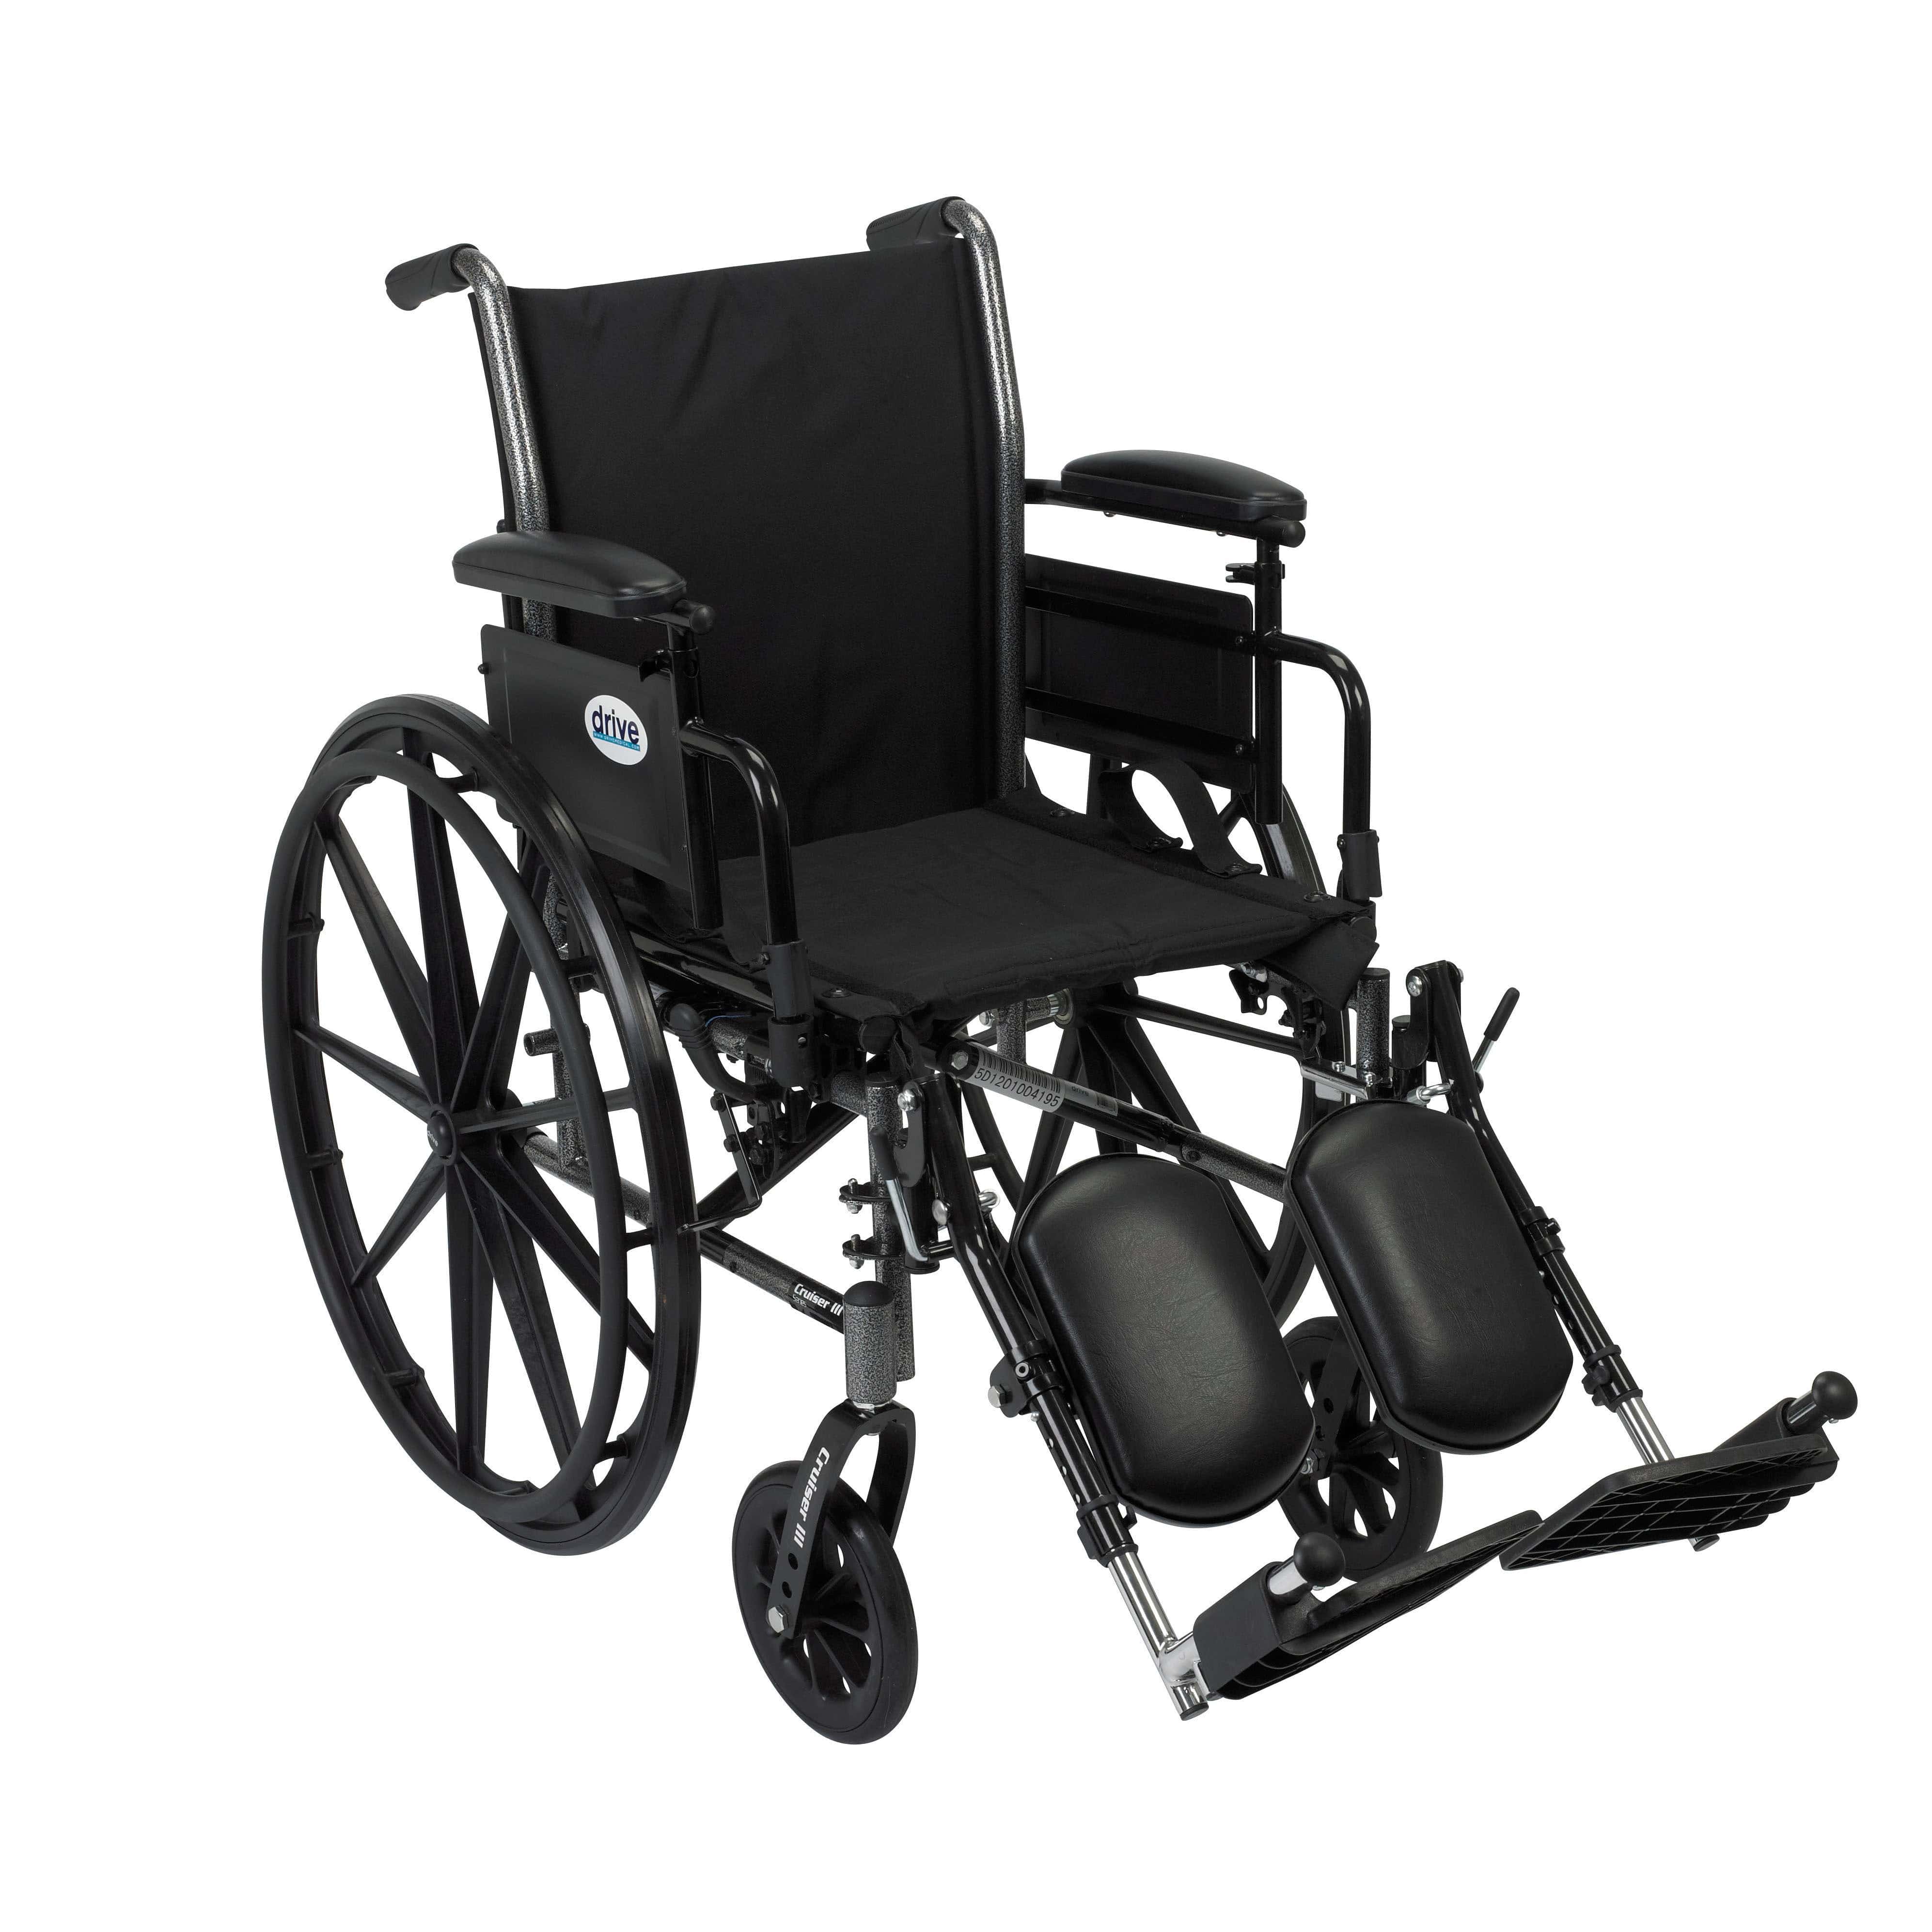 Drive Medical Wheelchairs Flip Back Removable Adjustable Height Desk Arms and Elevating Leg Rests / 18" Seat Drive Medical Cruiser III Light Weight Wheelchair with Flip Back Removable Arms